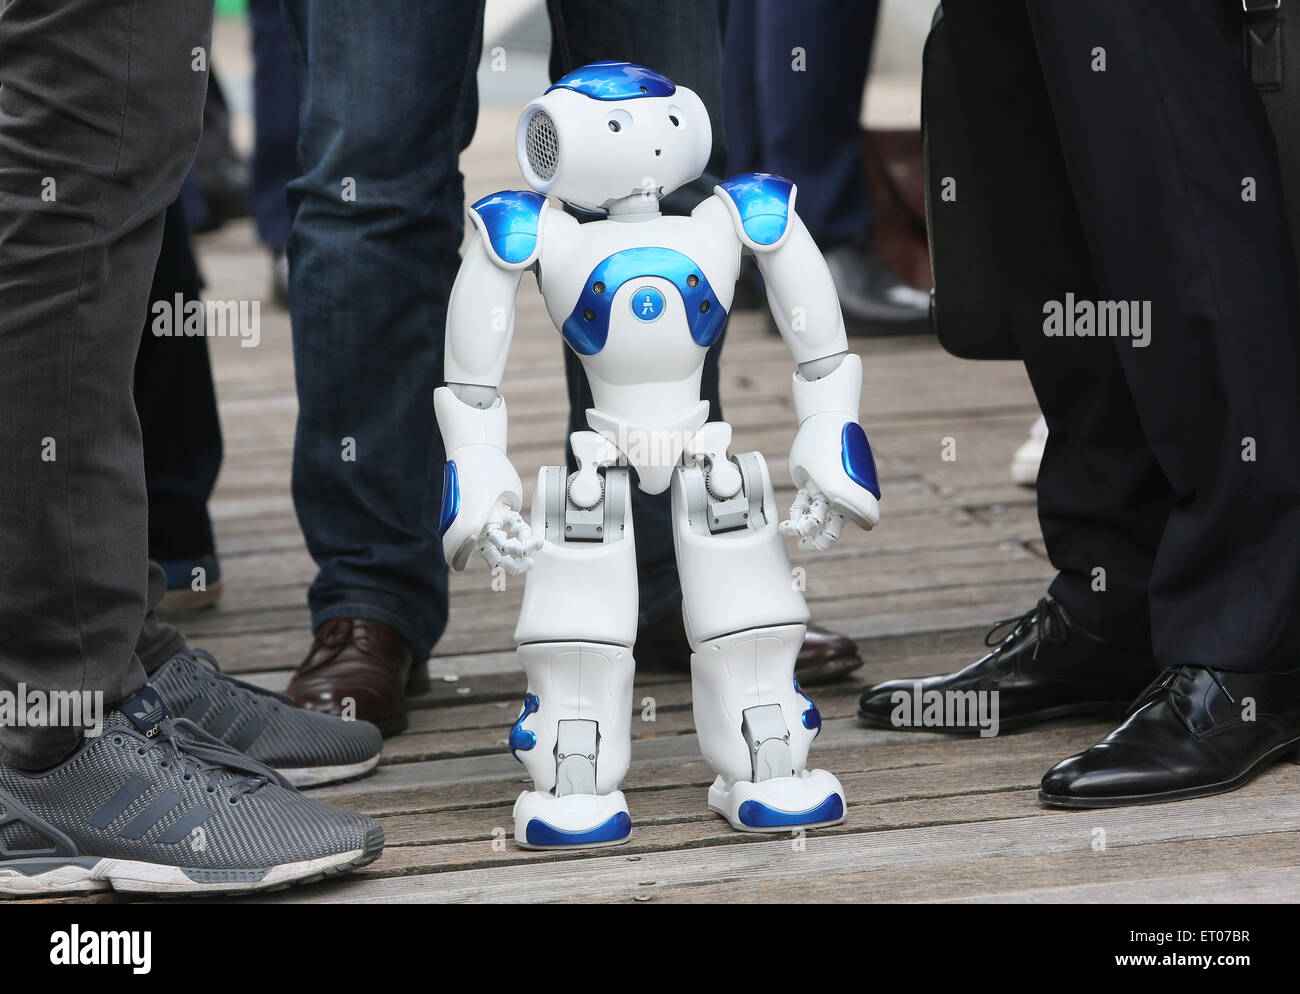 Berlin, Germany. 10th June, 2015. The french robot Henry (product name Nao)  welcomes candidates searching for leadership positions in the digital world  at the office of the job agency CareerTeam at the